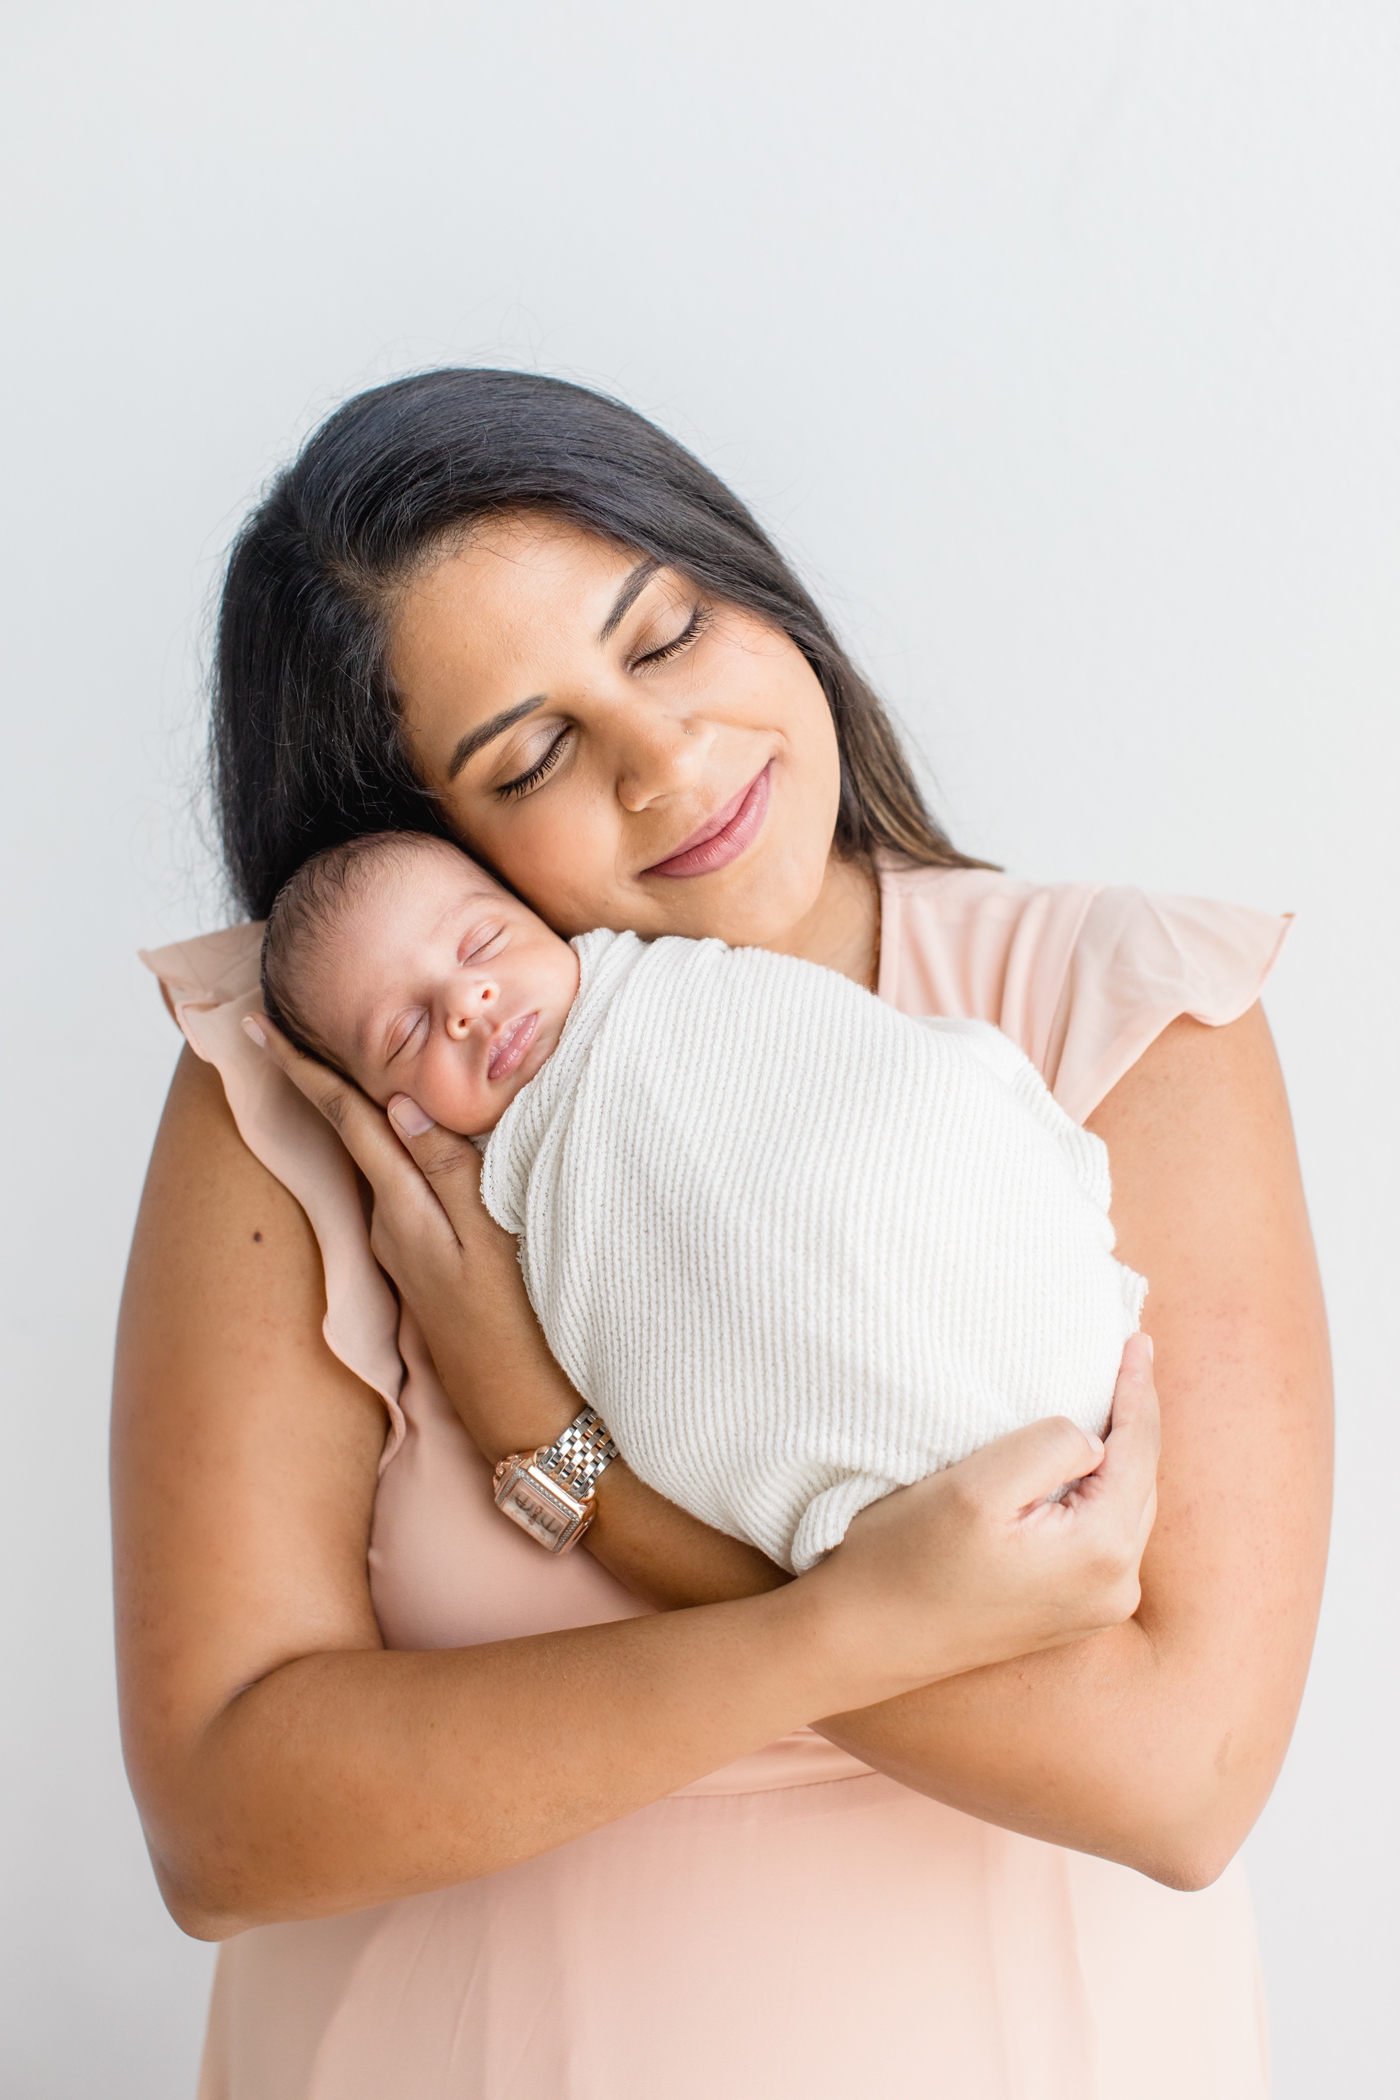 Mom cuddling baby during newborn session in studio. Photo by Sana Ahmed Photography.